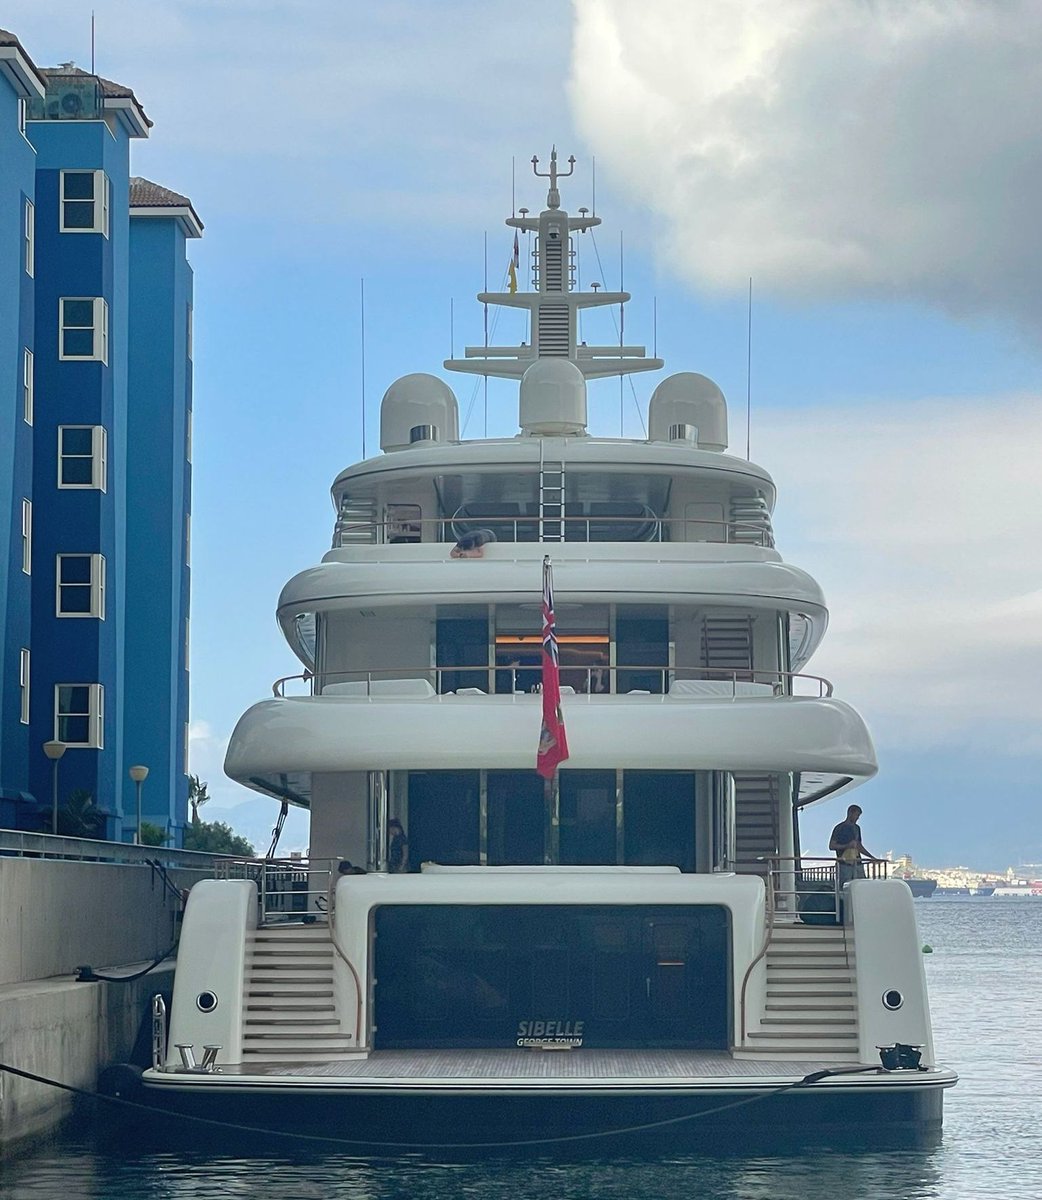 The 67.4m/ 221ft Sibelle, launched on 18 March at De Kaag, was pictured by Danny in Gibraltar this week. Photos by @DannyWheelz on Instagram. #Sibelle #DannyWheelz #Gibraltar #Superyacht #Megayacht